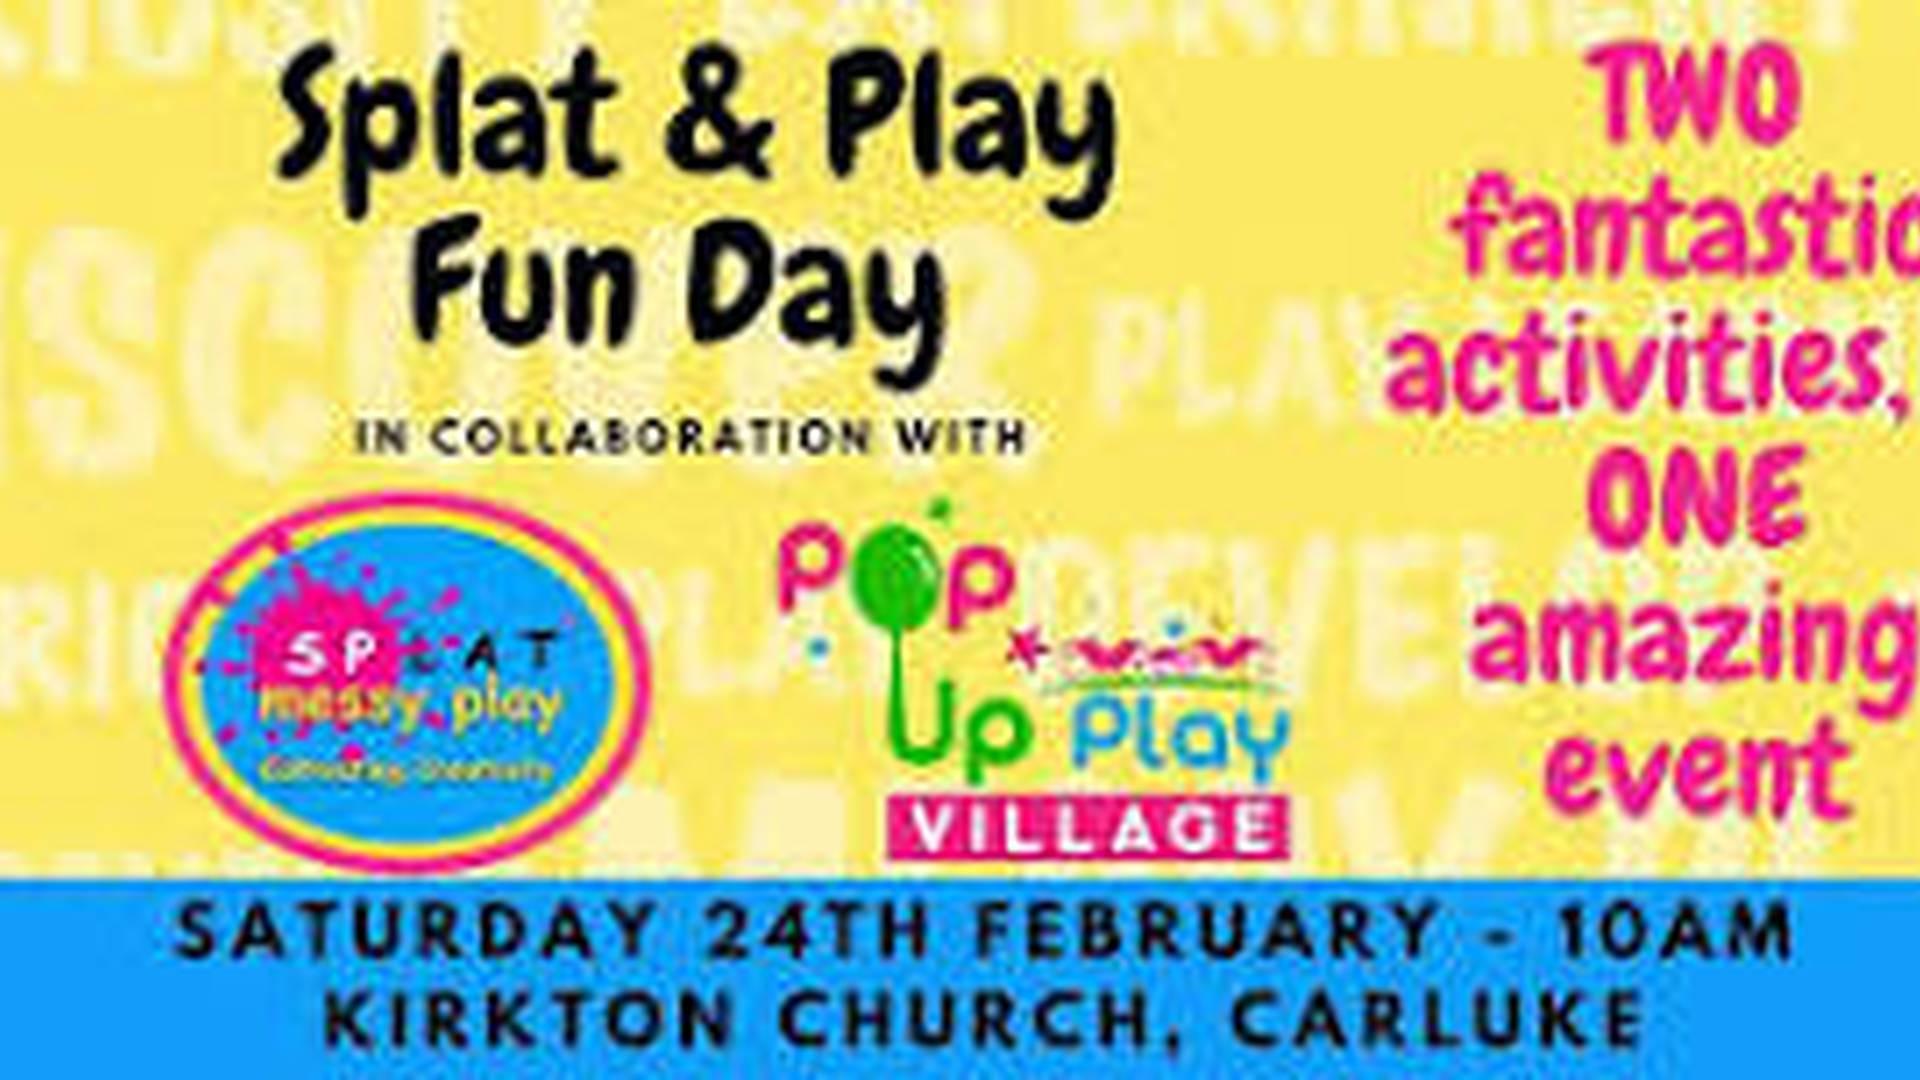 Splat & Play Fun Day with Splat Messy Play and Pop Up Play Village photo